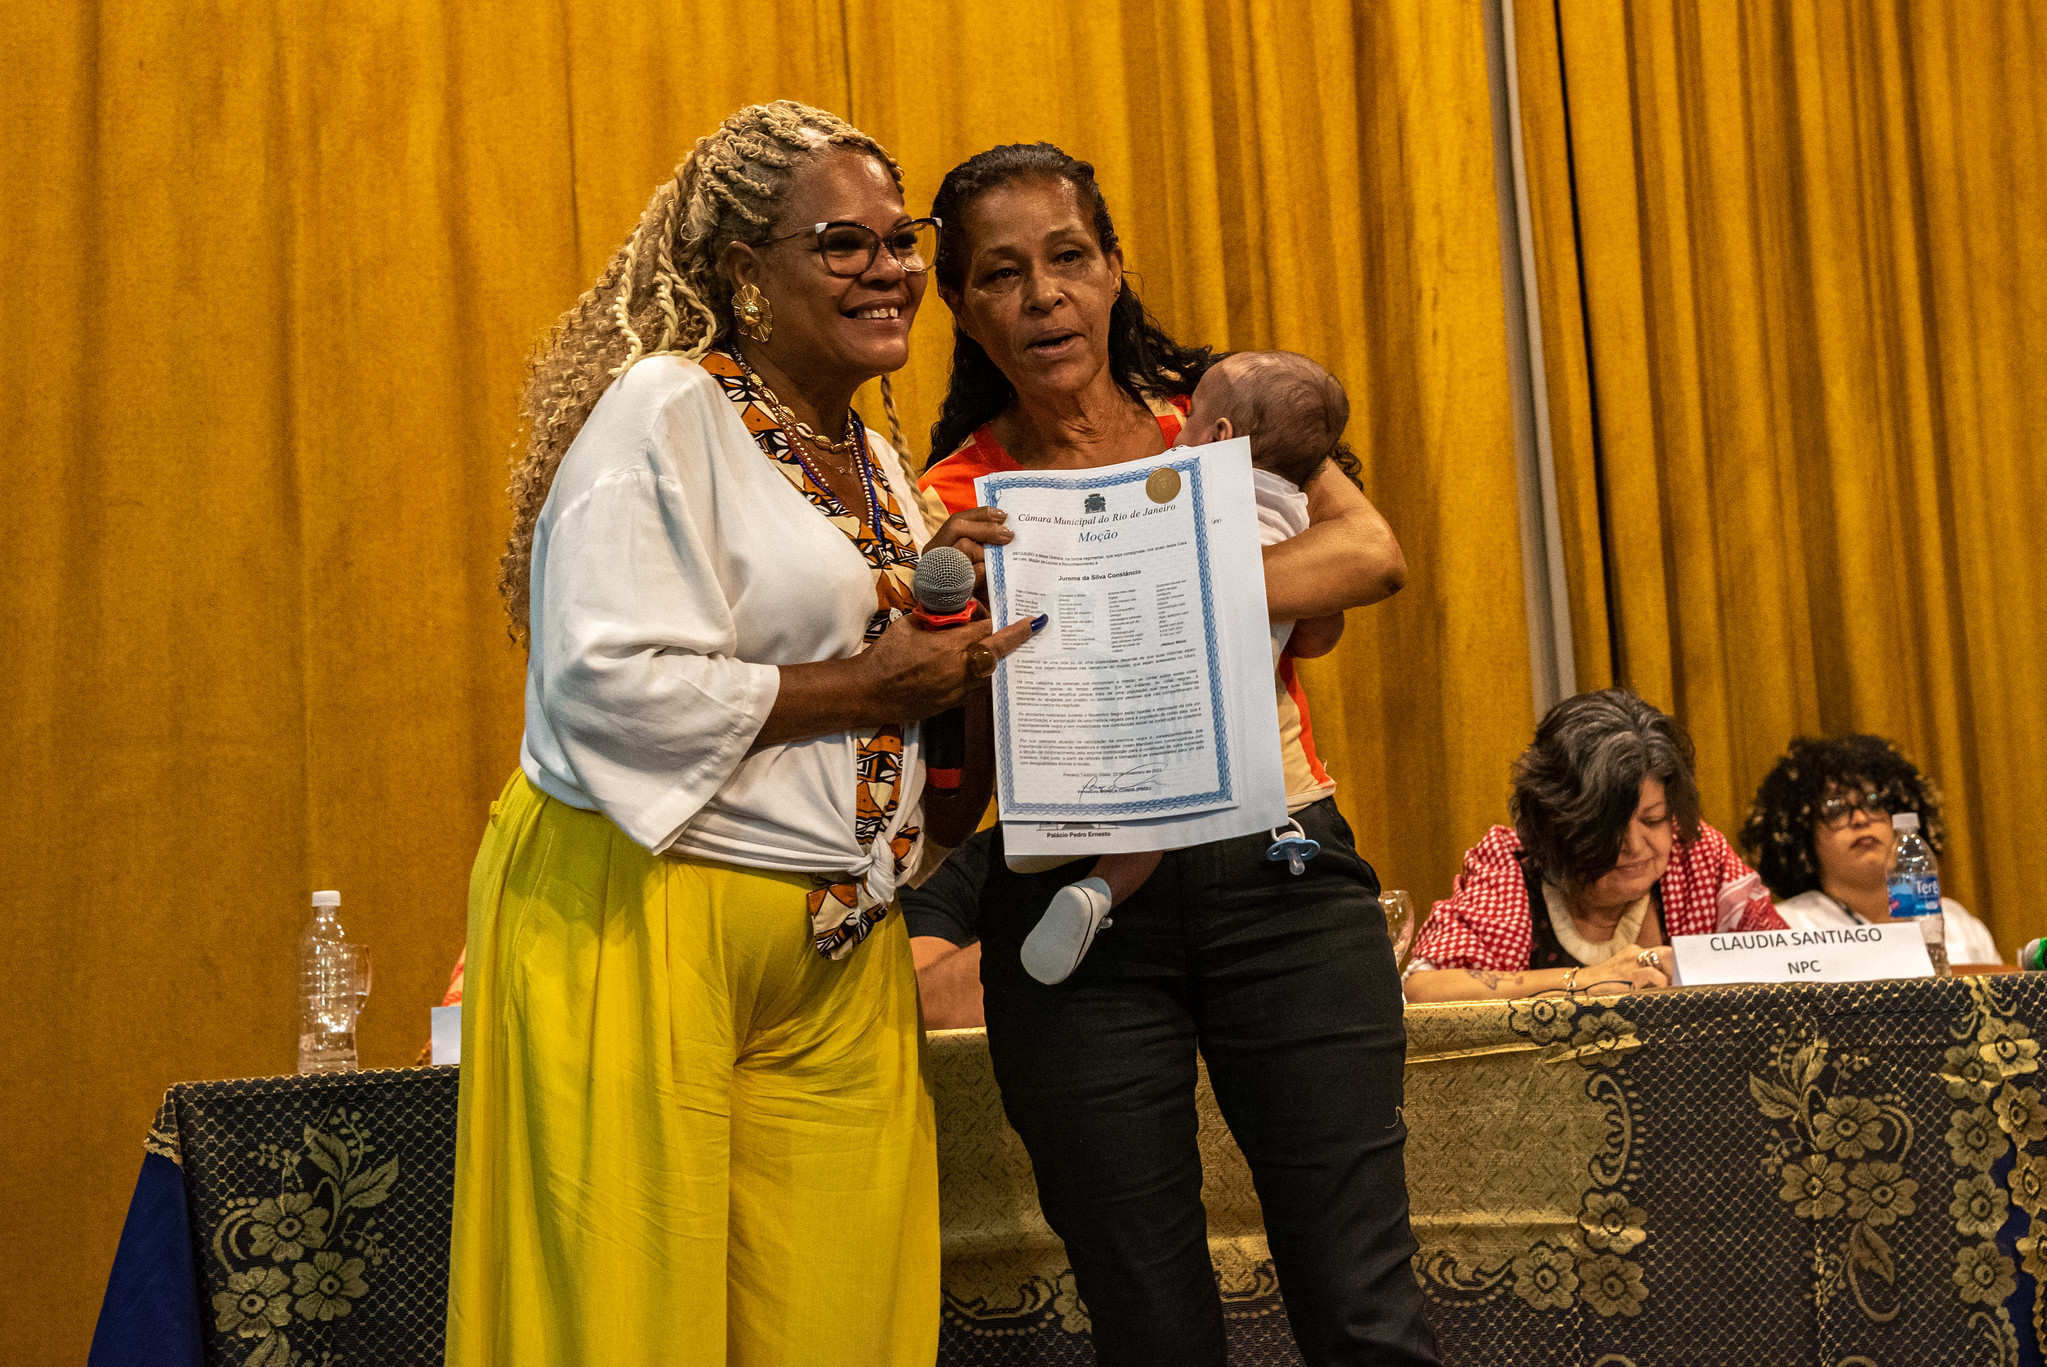 Jurema Constâncio, of the Shangri-Lá Housing Cooperative in Taquara, West Zone of Rio, and a member of the National Union for Popular Housing (UNMP), receives a Motion of Praise and Recognition from Councilmember Mônica Cunha. Photo: Bárbara Dias